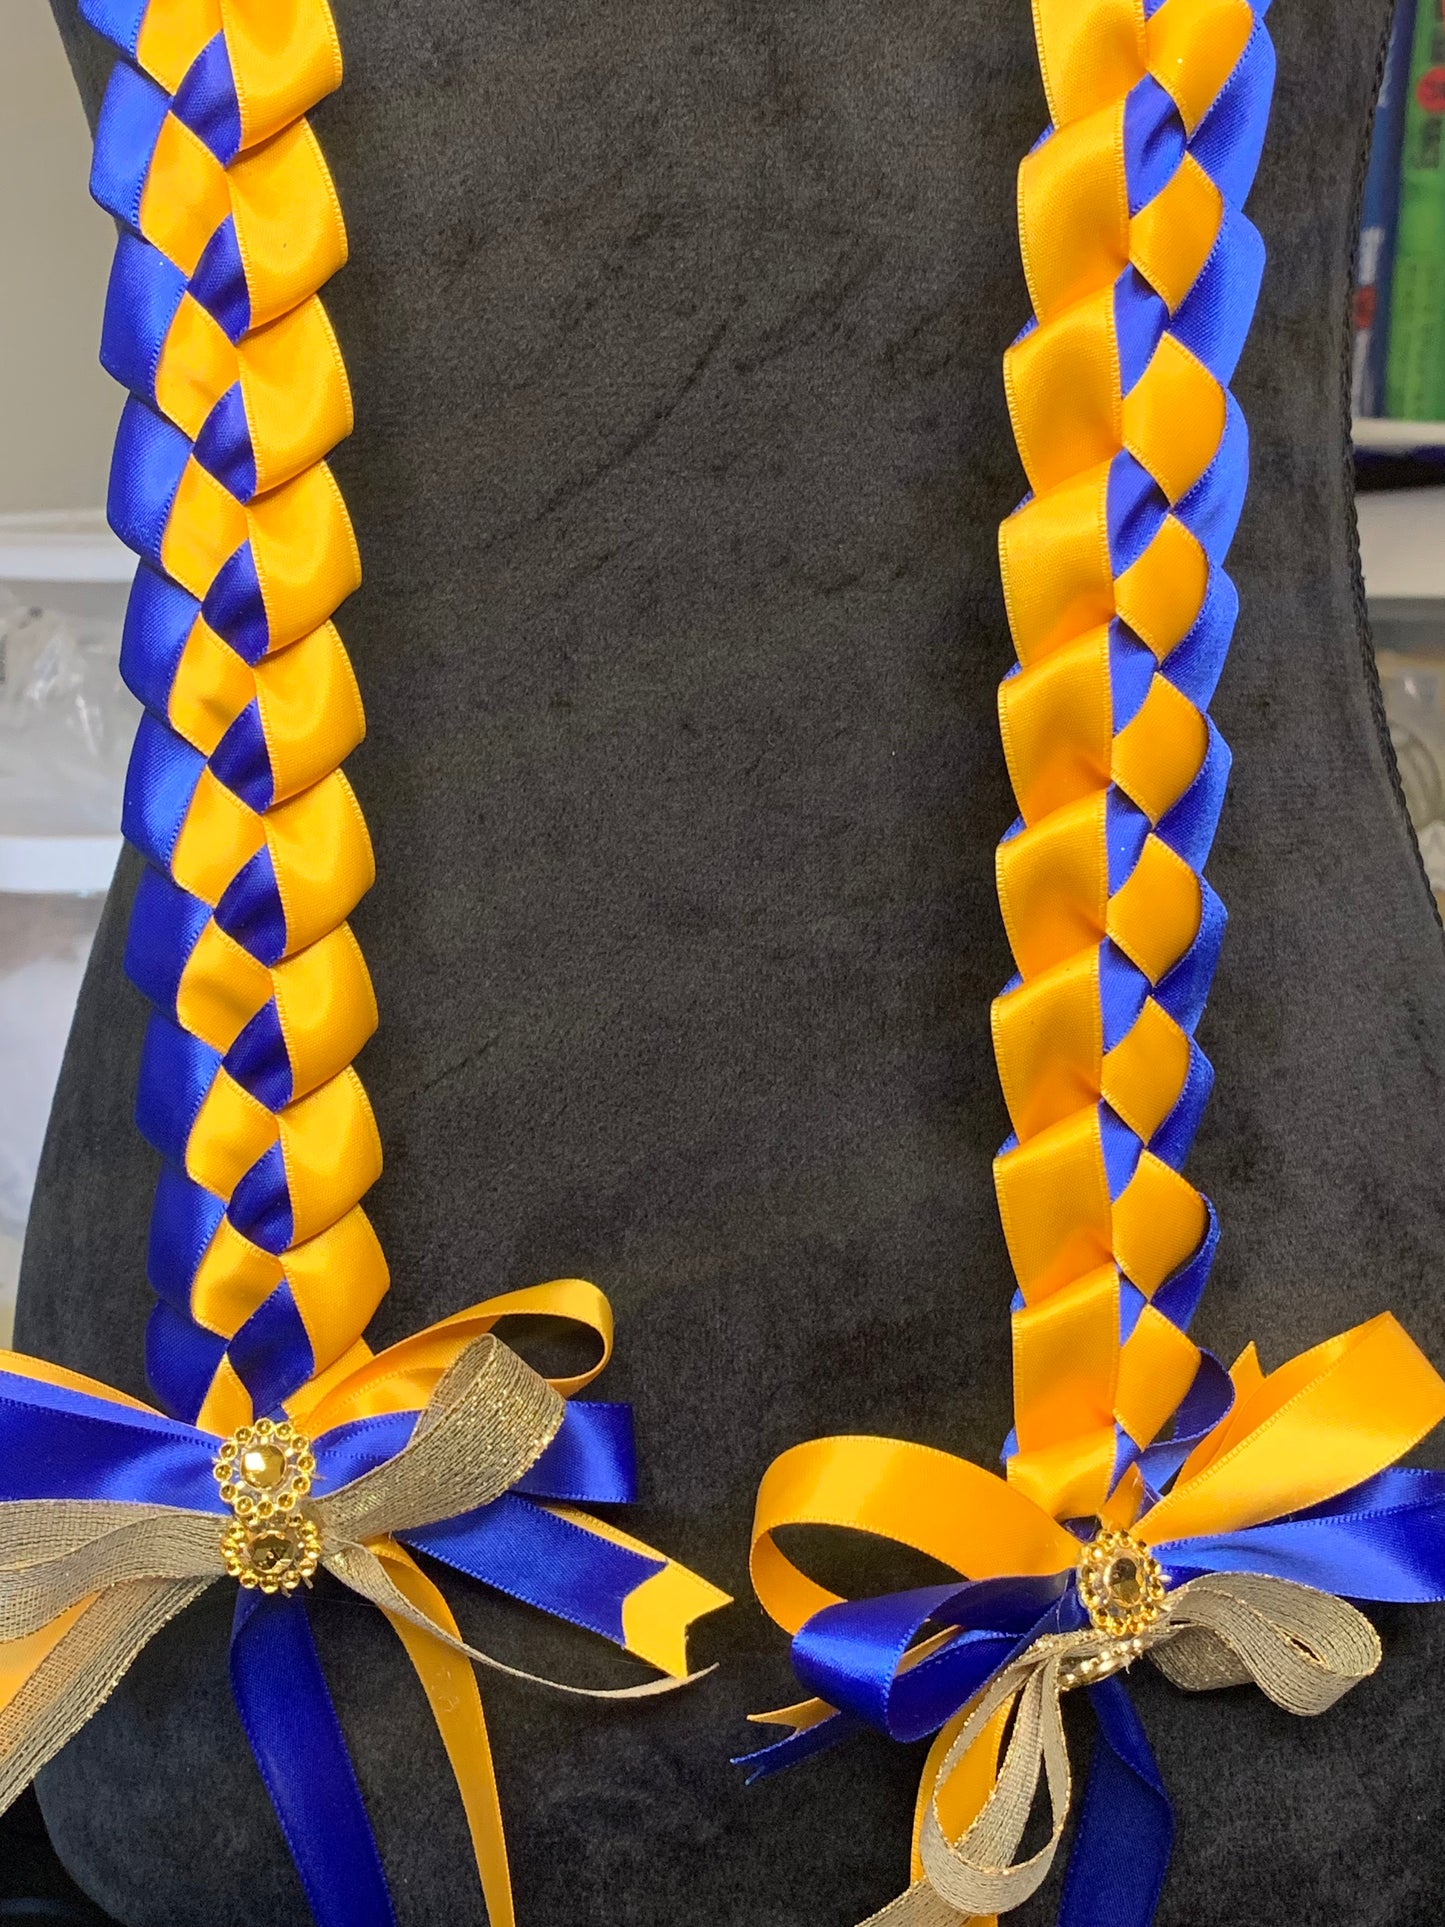 This is the Graduation Cord with no personalization which can be ordered this way as well.  